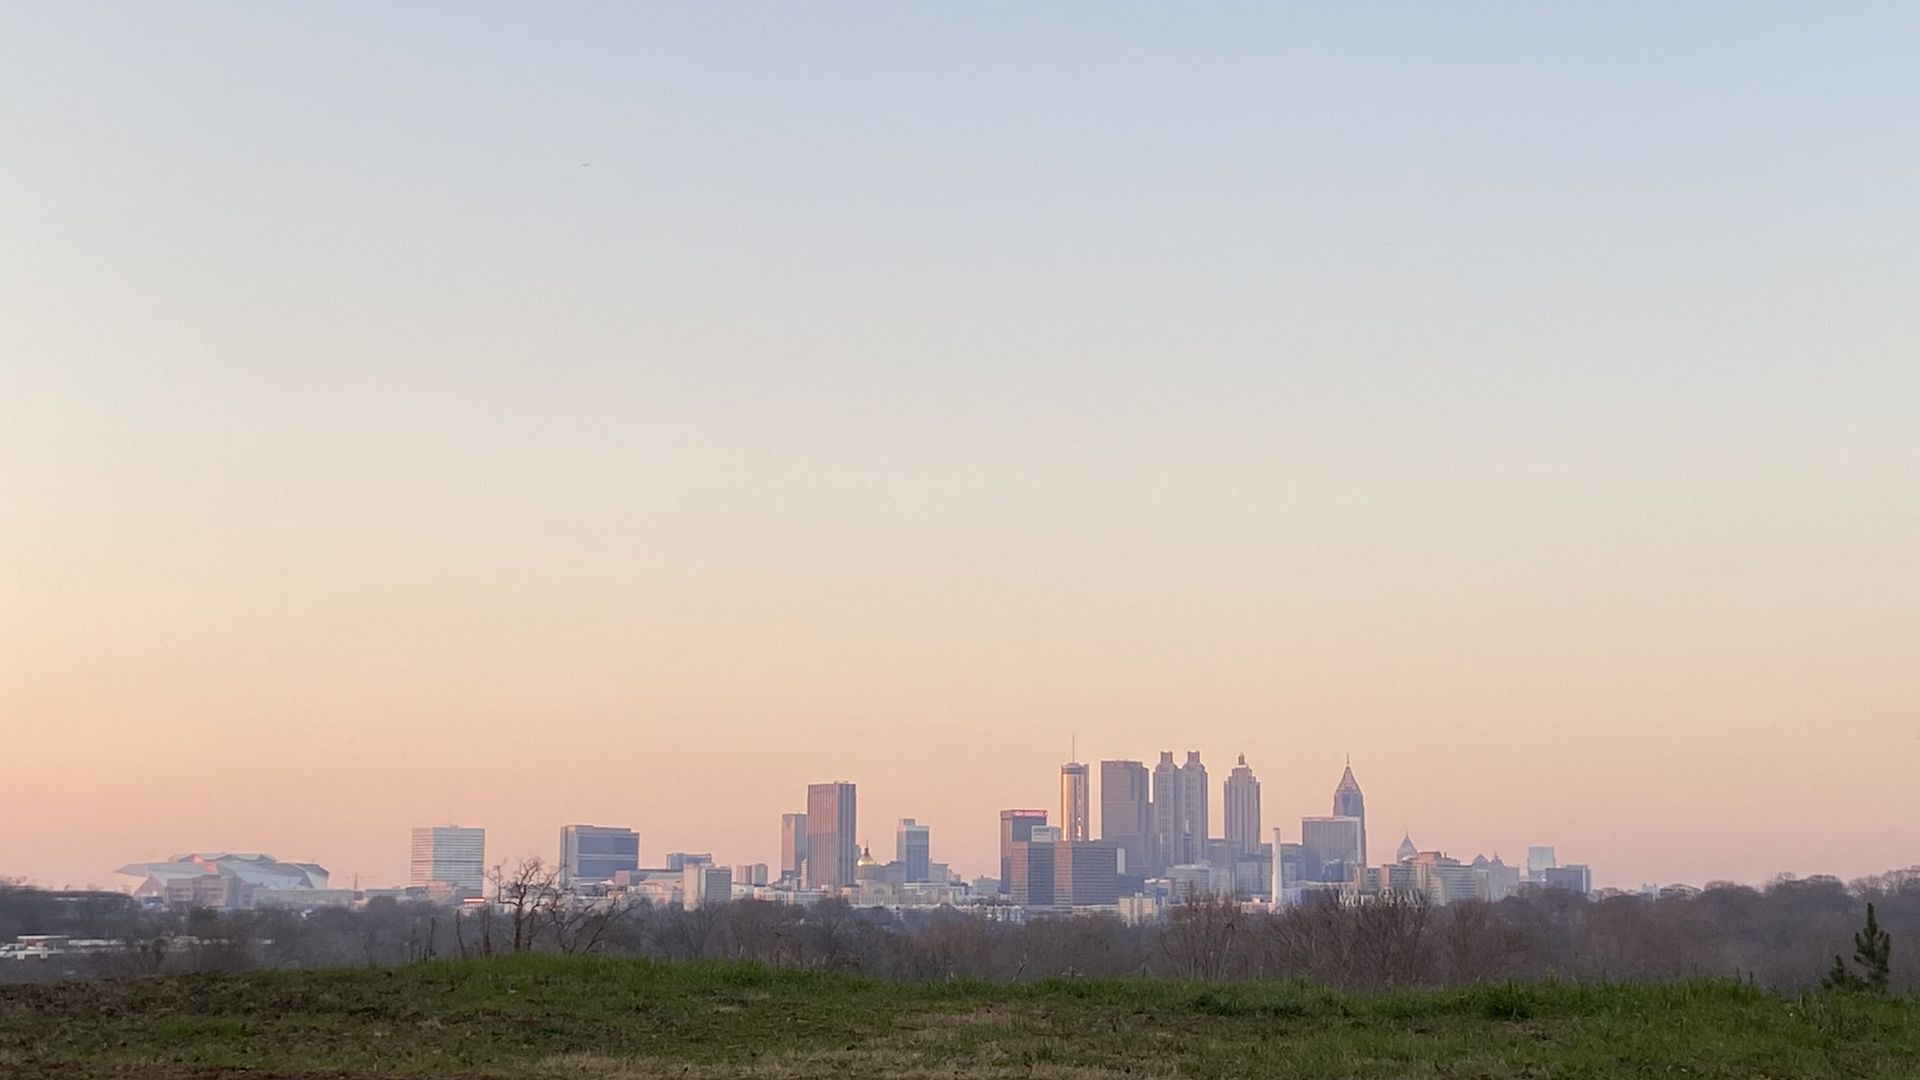 A photo of the Atlanta skyline from a hilltop at dusk